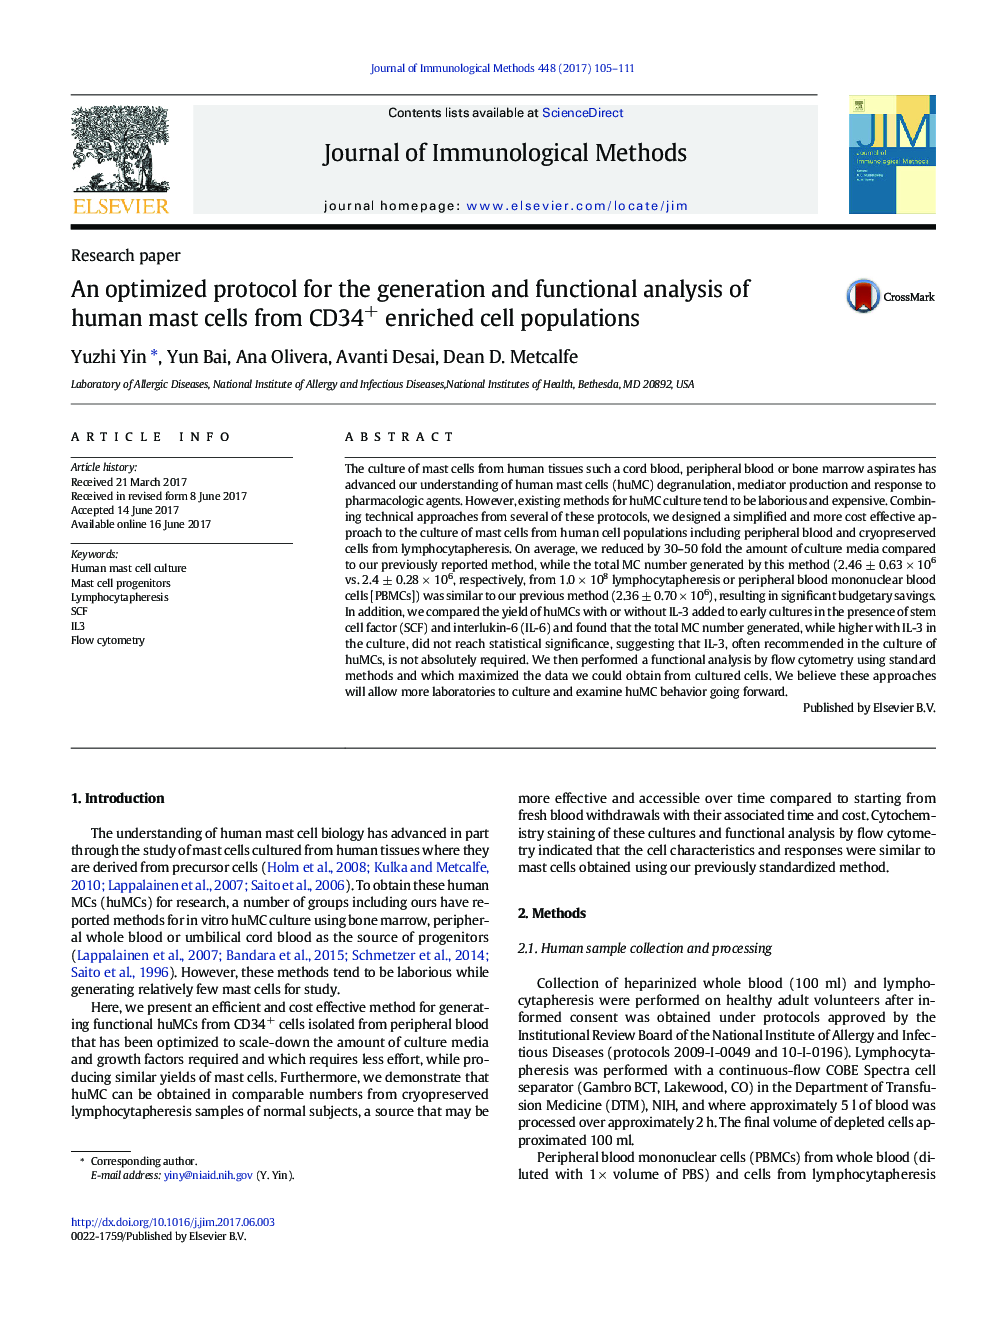 Research paperAn optimized protocol for the generation and functional analysis of human mast cells from CD34+ enriched cell populations